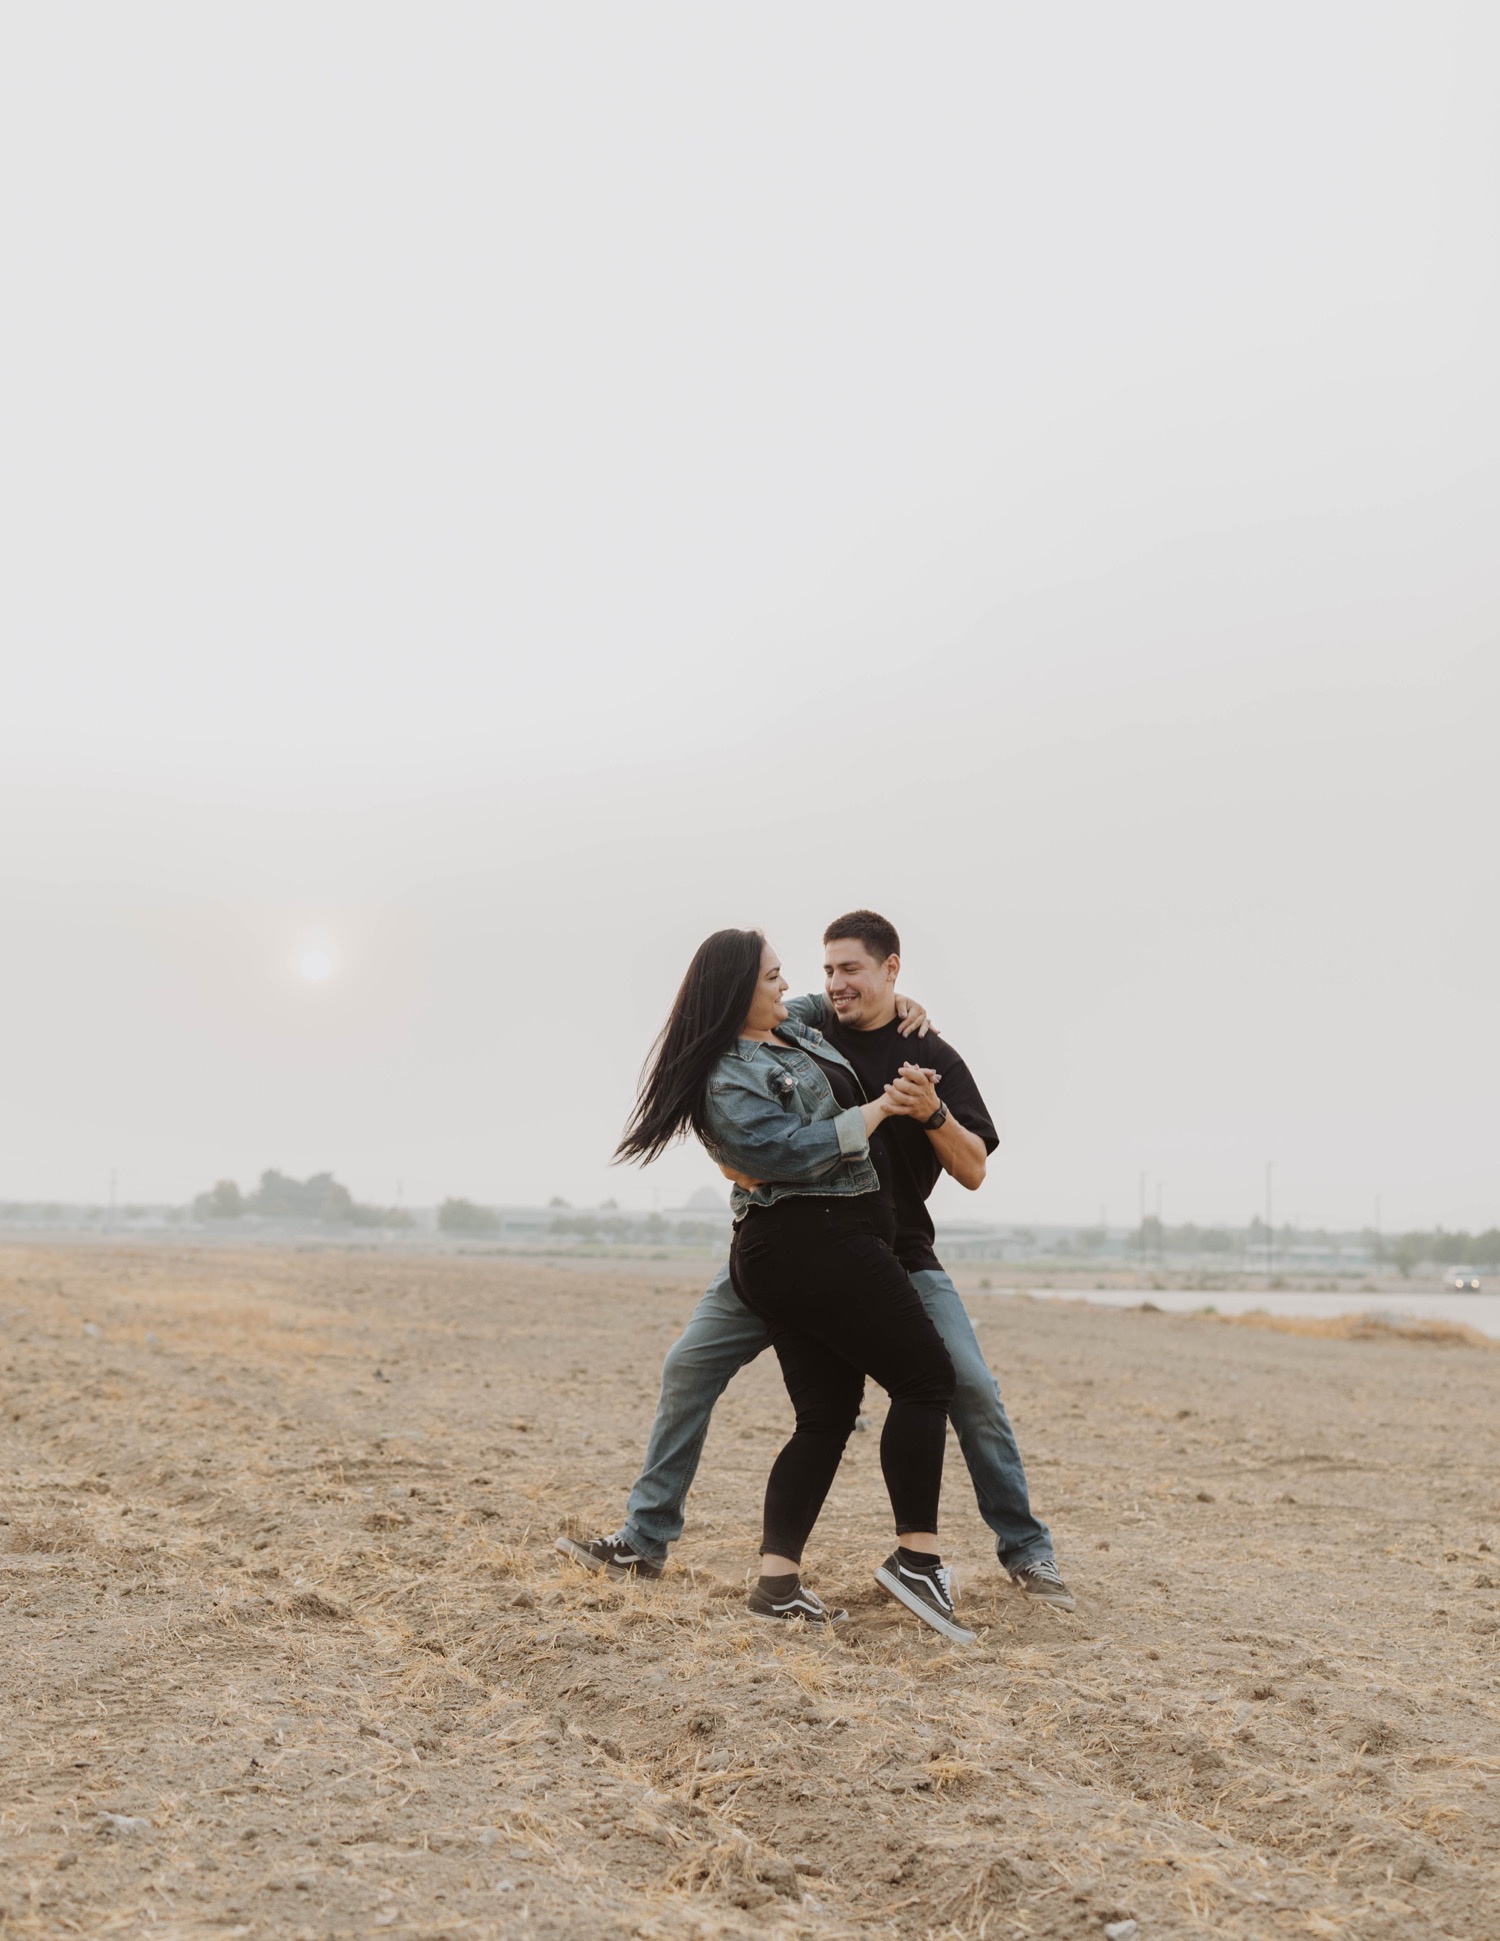 Rocky French, Firefly Images | Grabbed some shots of this super cute couple  yesterday too. ************ #couples #couplesgoals #couplesshoot  #couplesession #couplesph... | Instagram